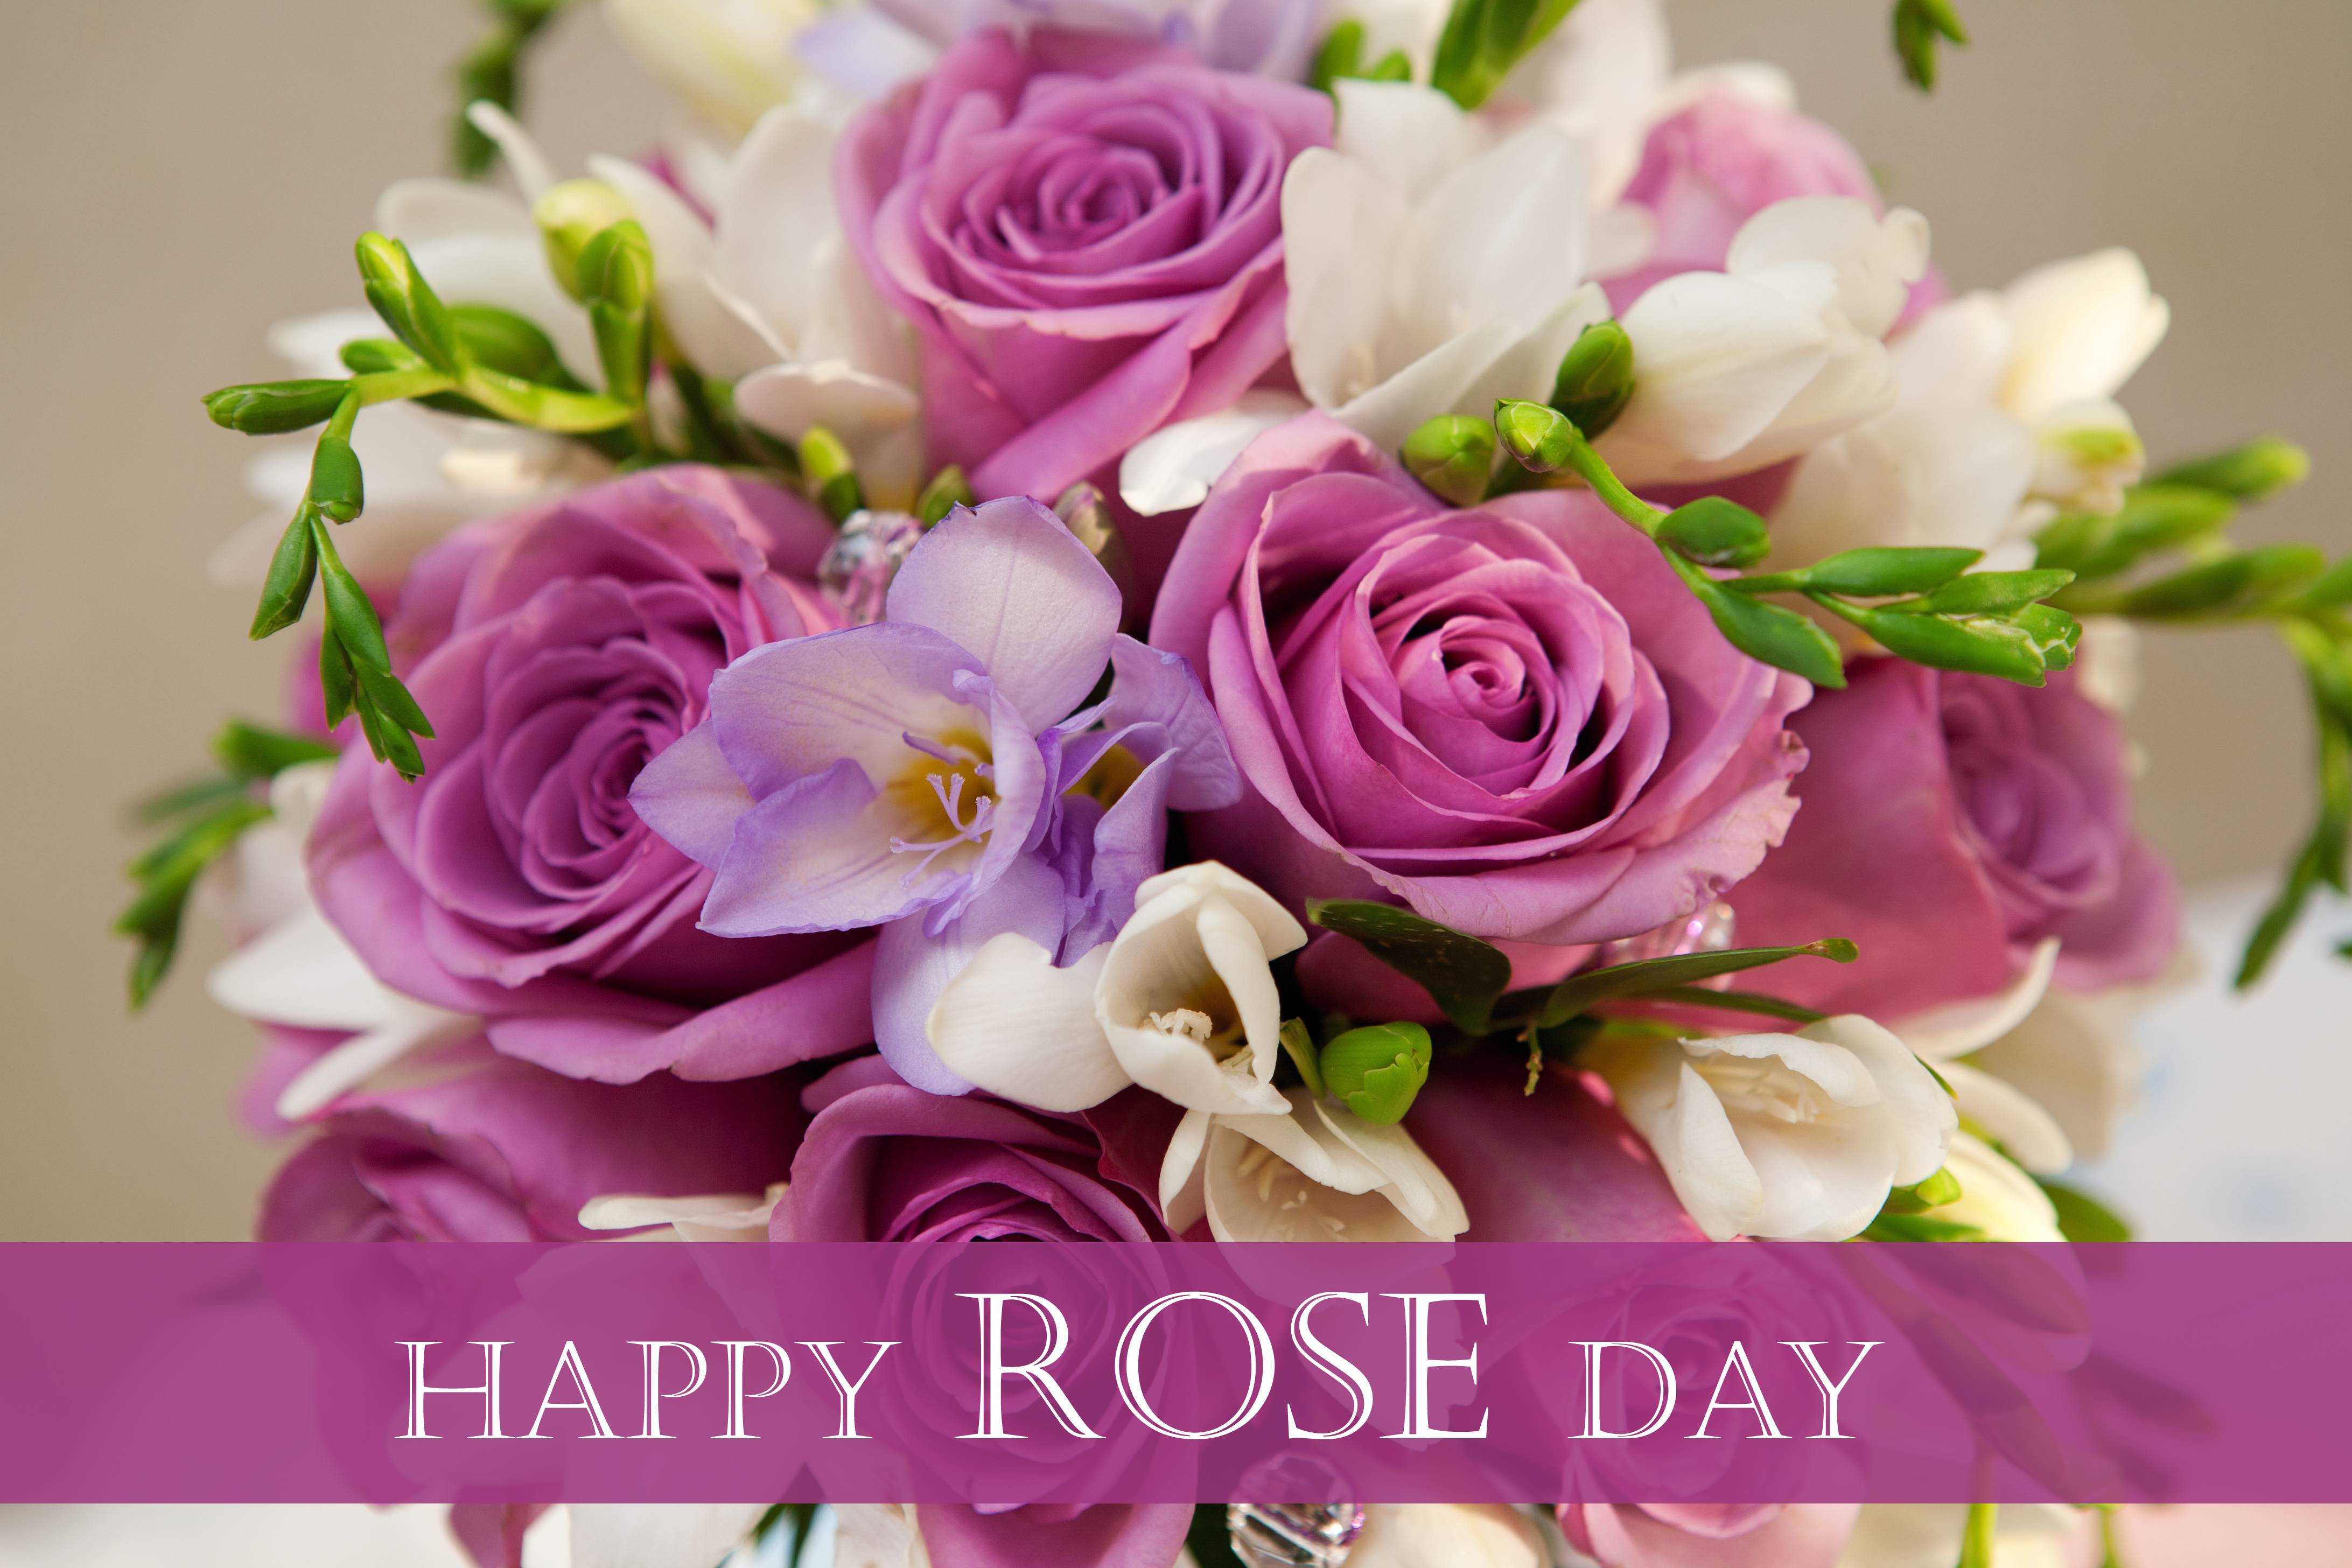 Rose Day Wallpaper and Beautiful Image 2018